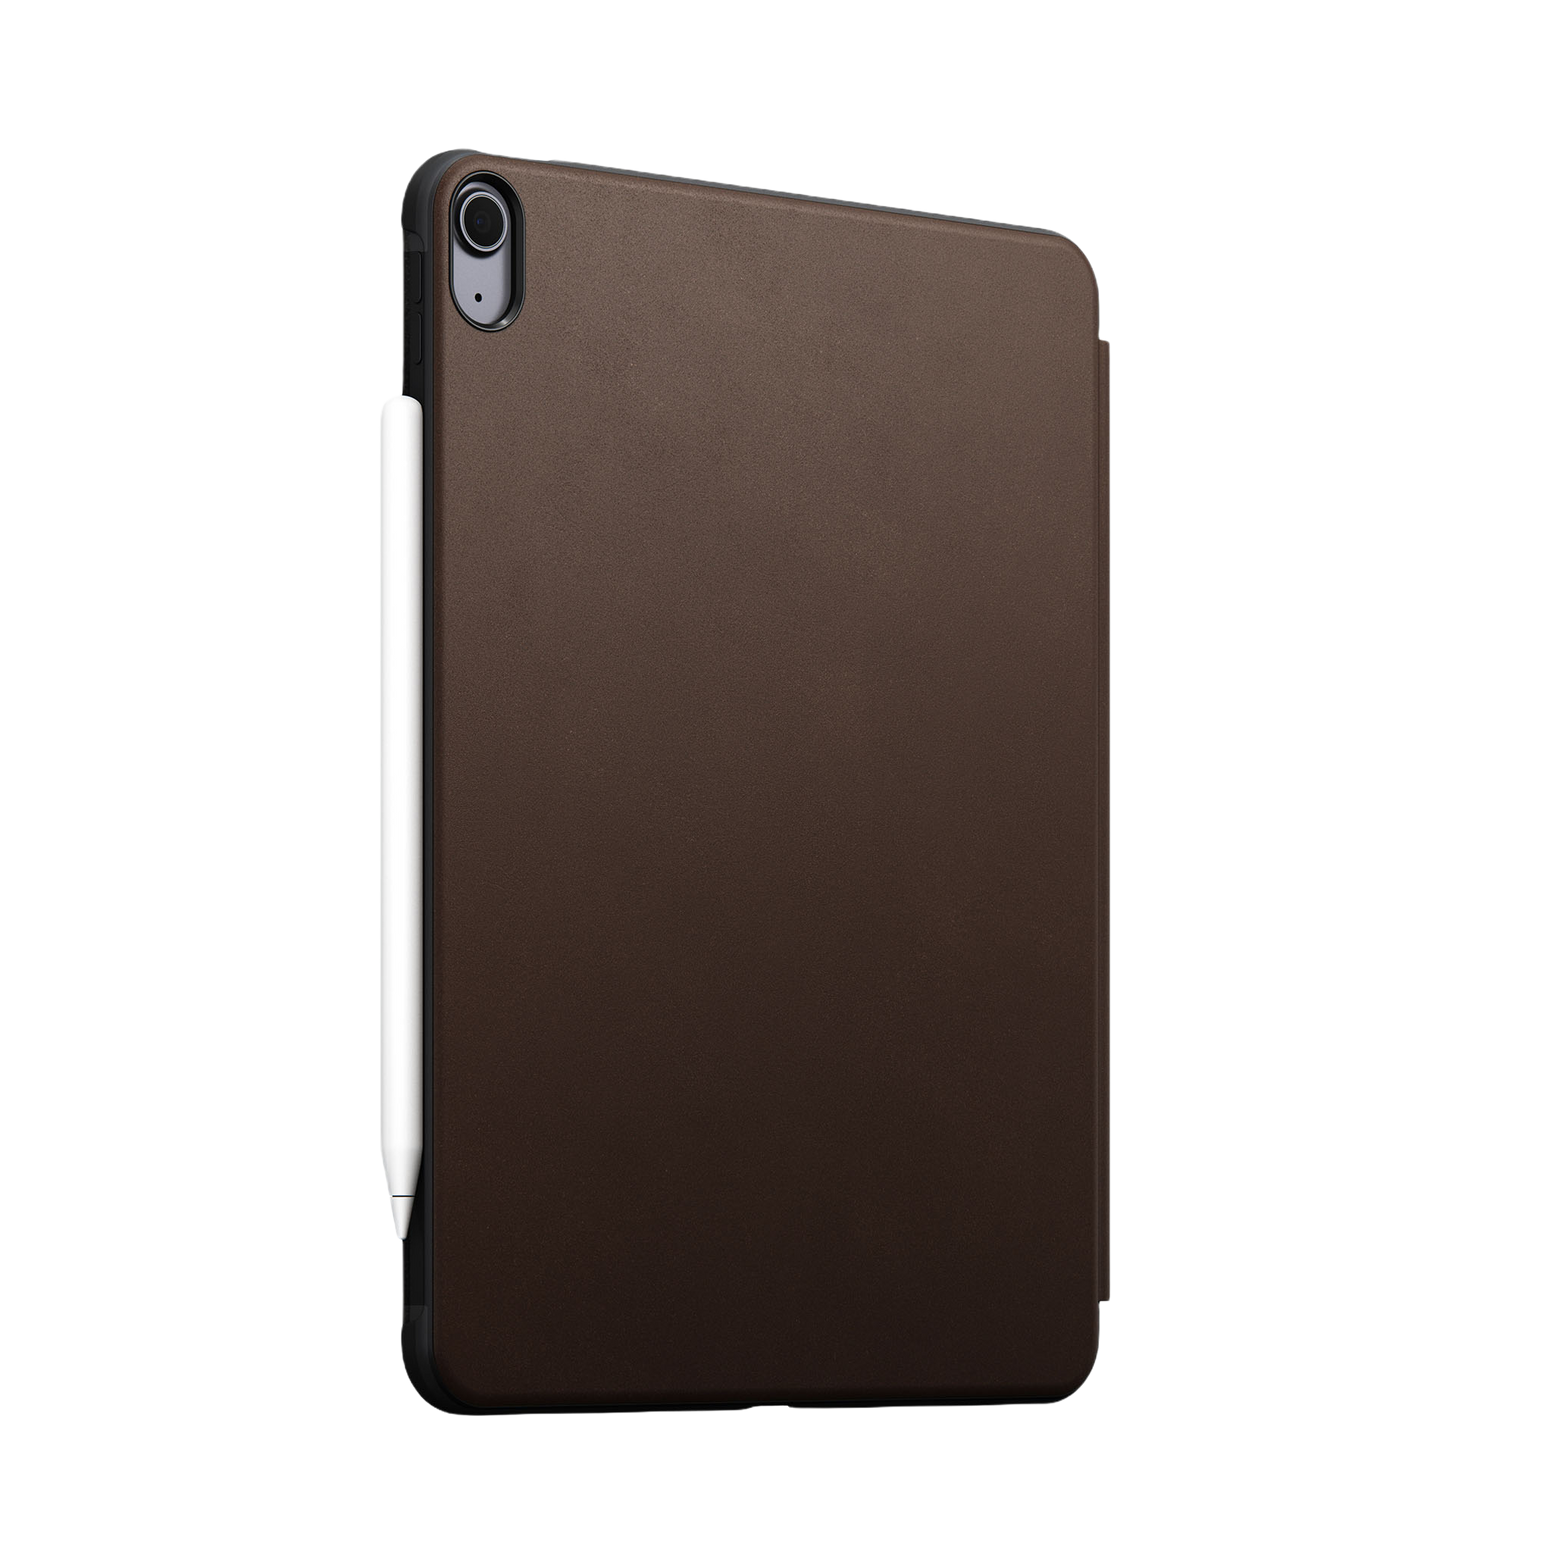 Nomad Modern Leather Folio for iPad Air (4th Gen) - Rustic Brown - Discontinued